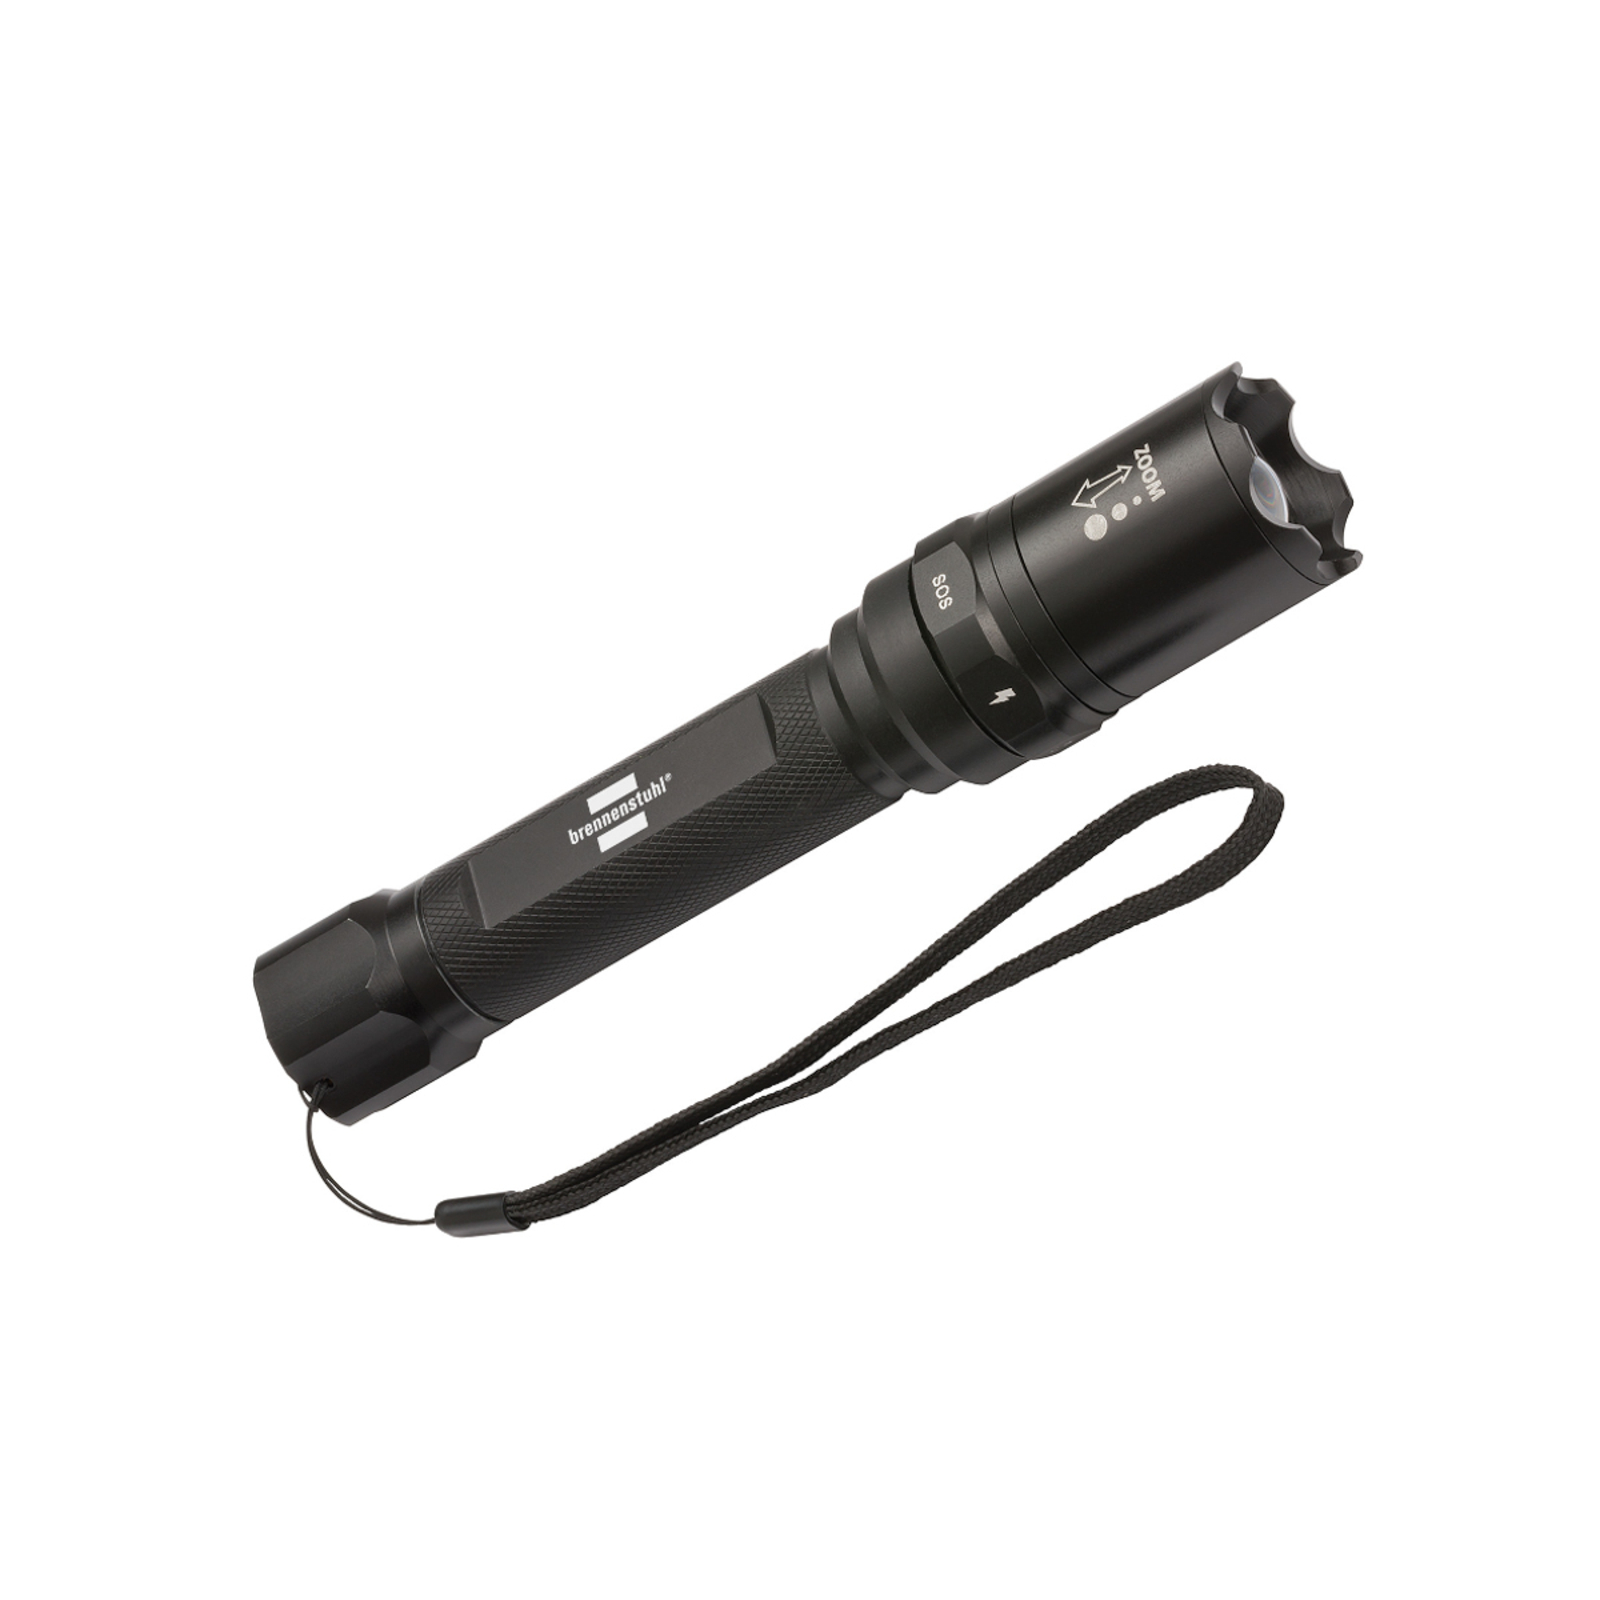 LuxPremium TL 400 AFS LED torch